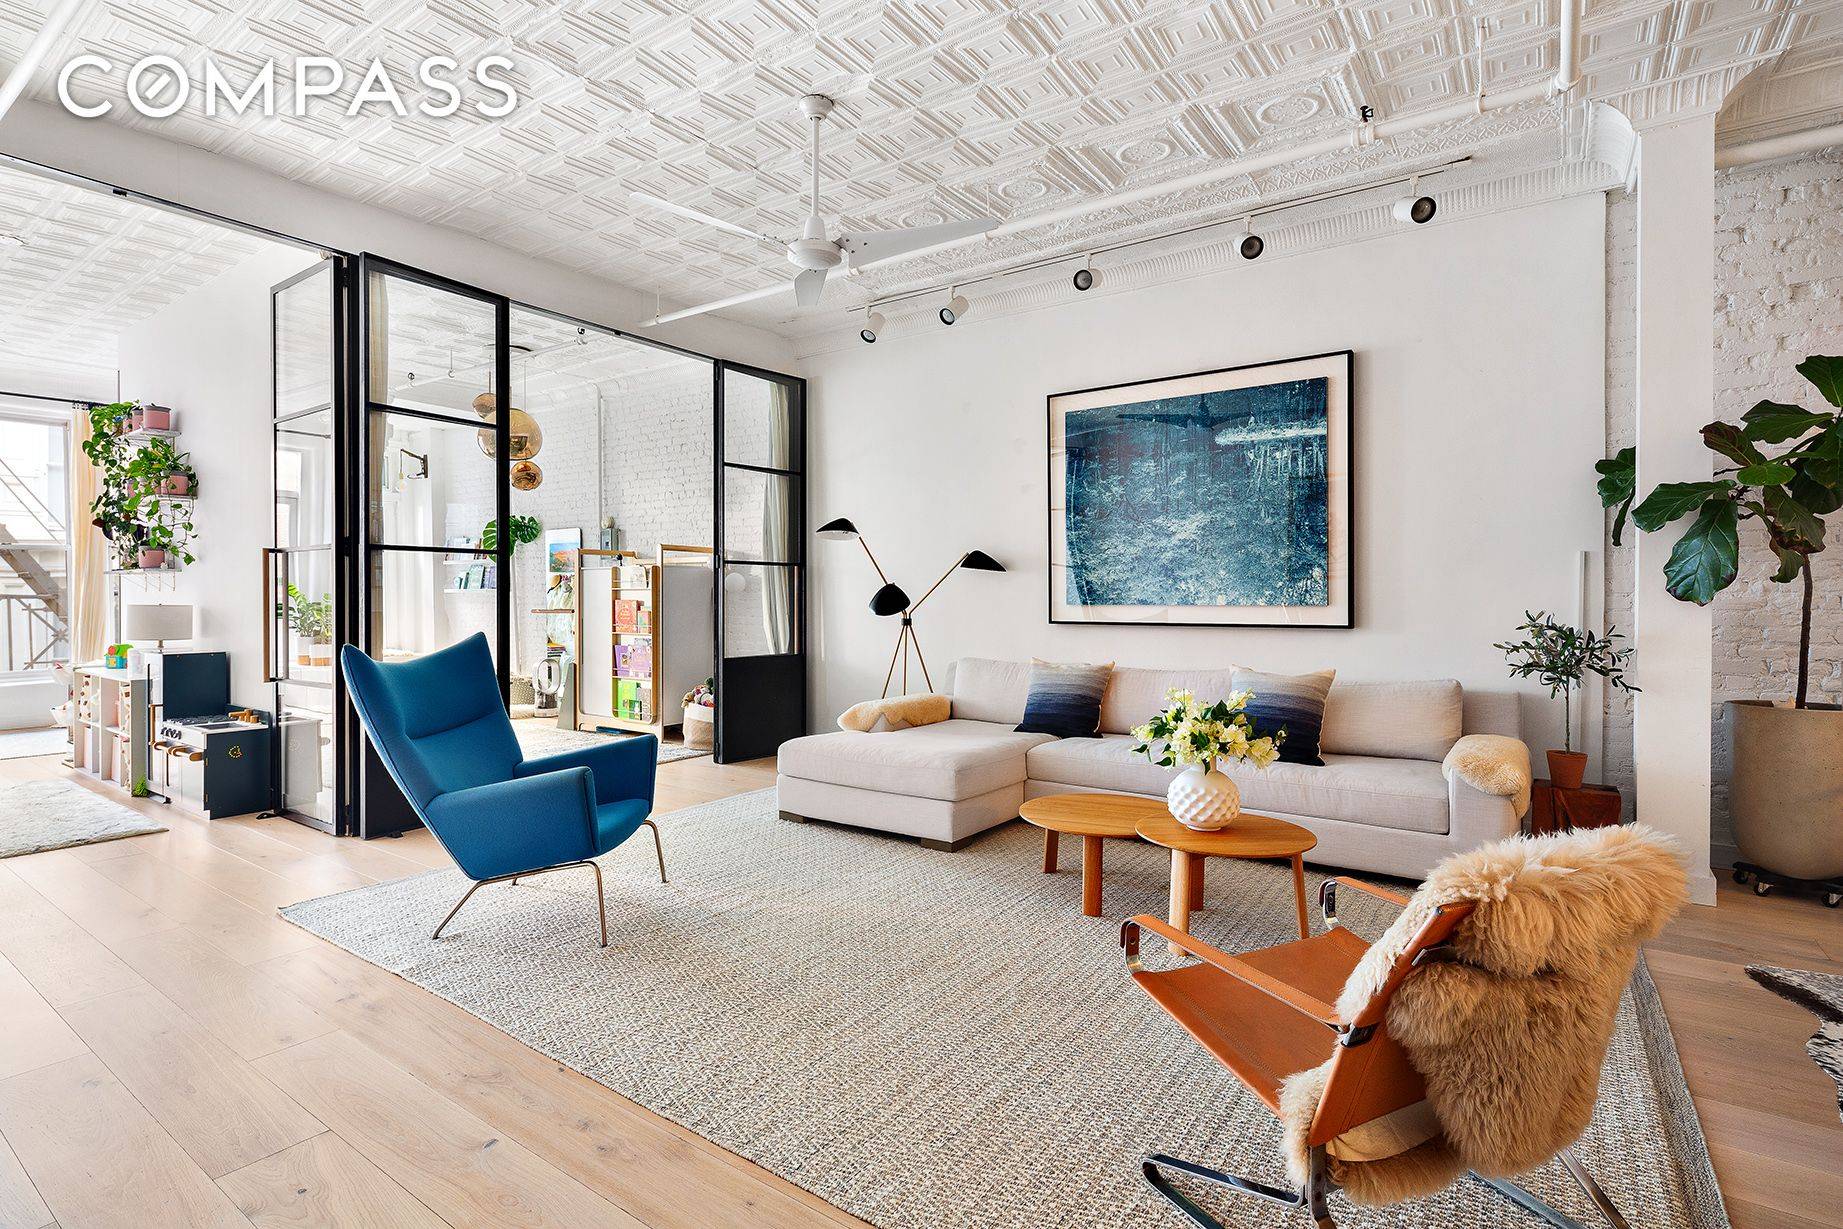 In this beautiful pre war two bedroom, two bathroom SoHo showplace, chic contemporary renovations meld with coveted historic architectural details to create an inviting loft residence that is warm, welcoming ...